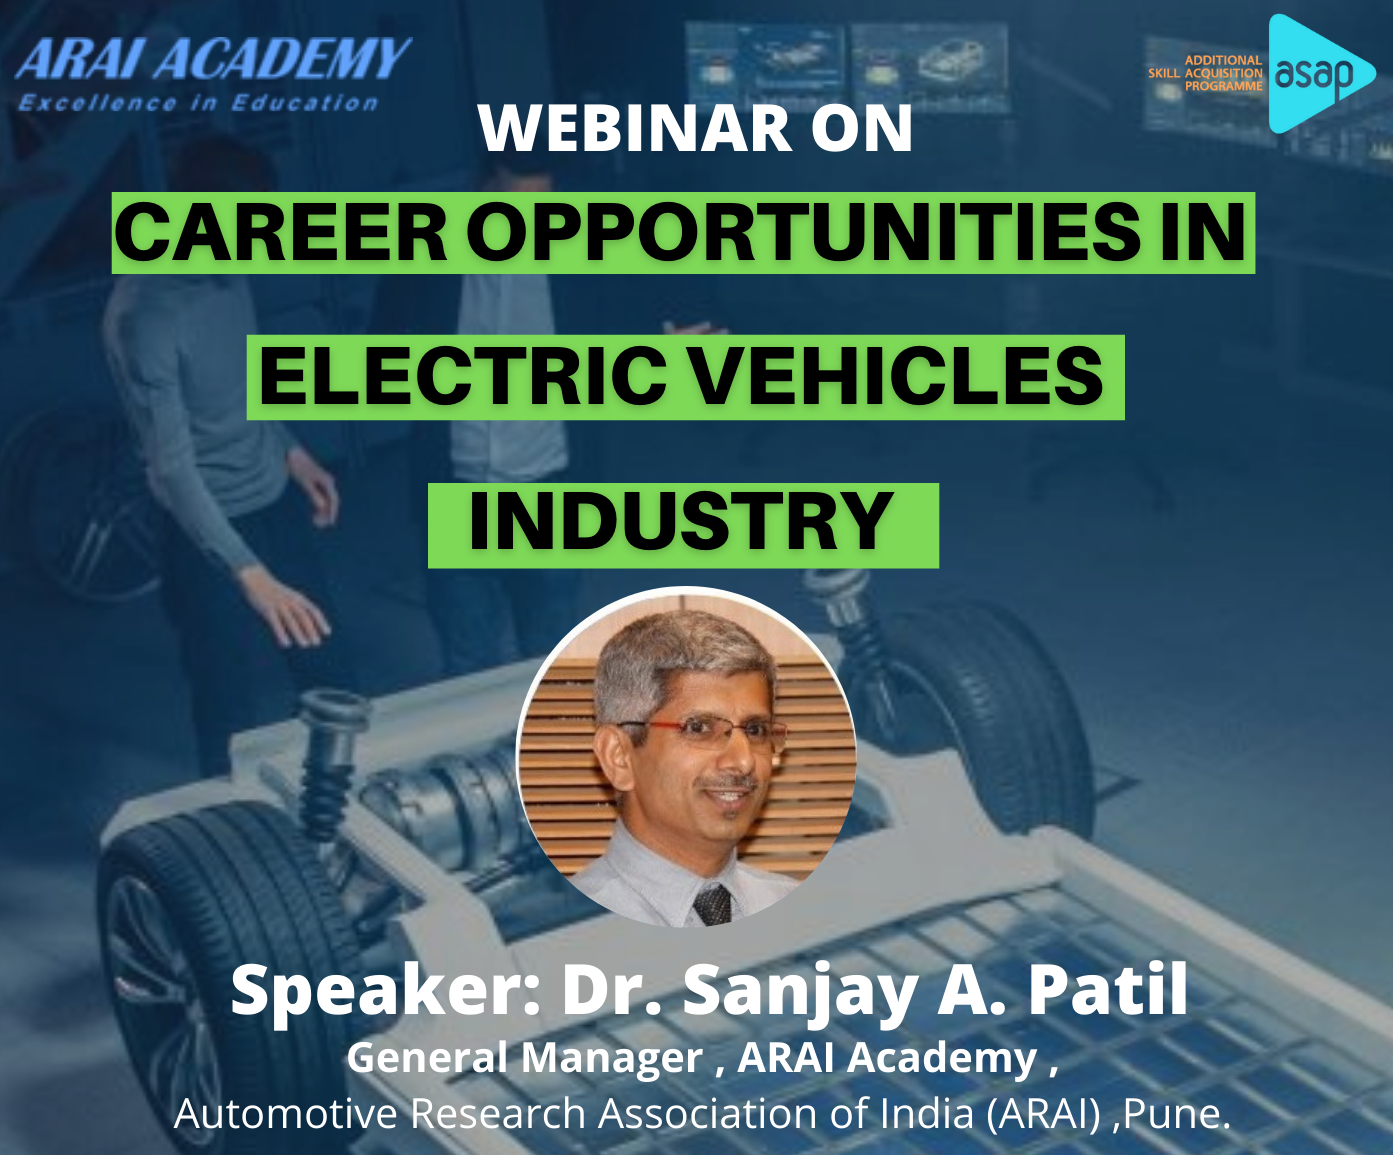 Career Opportunities in the Electric Vehicles Industry